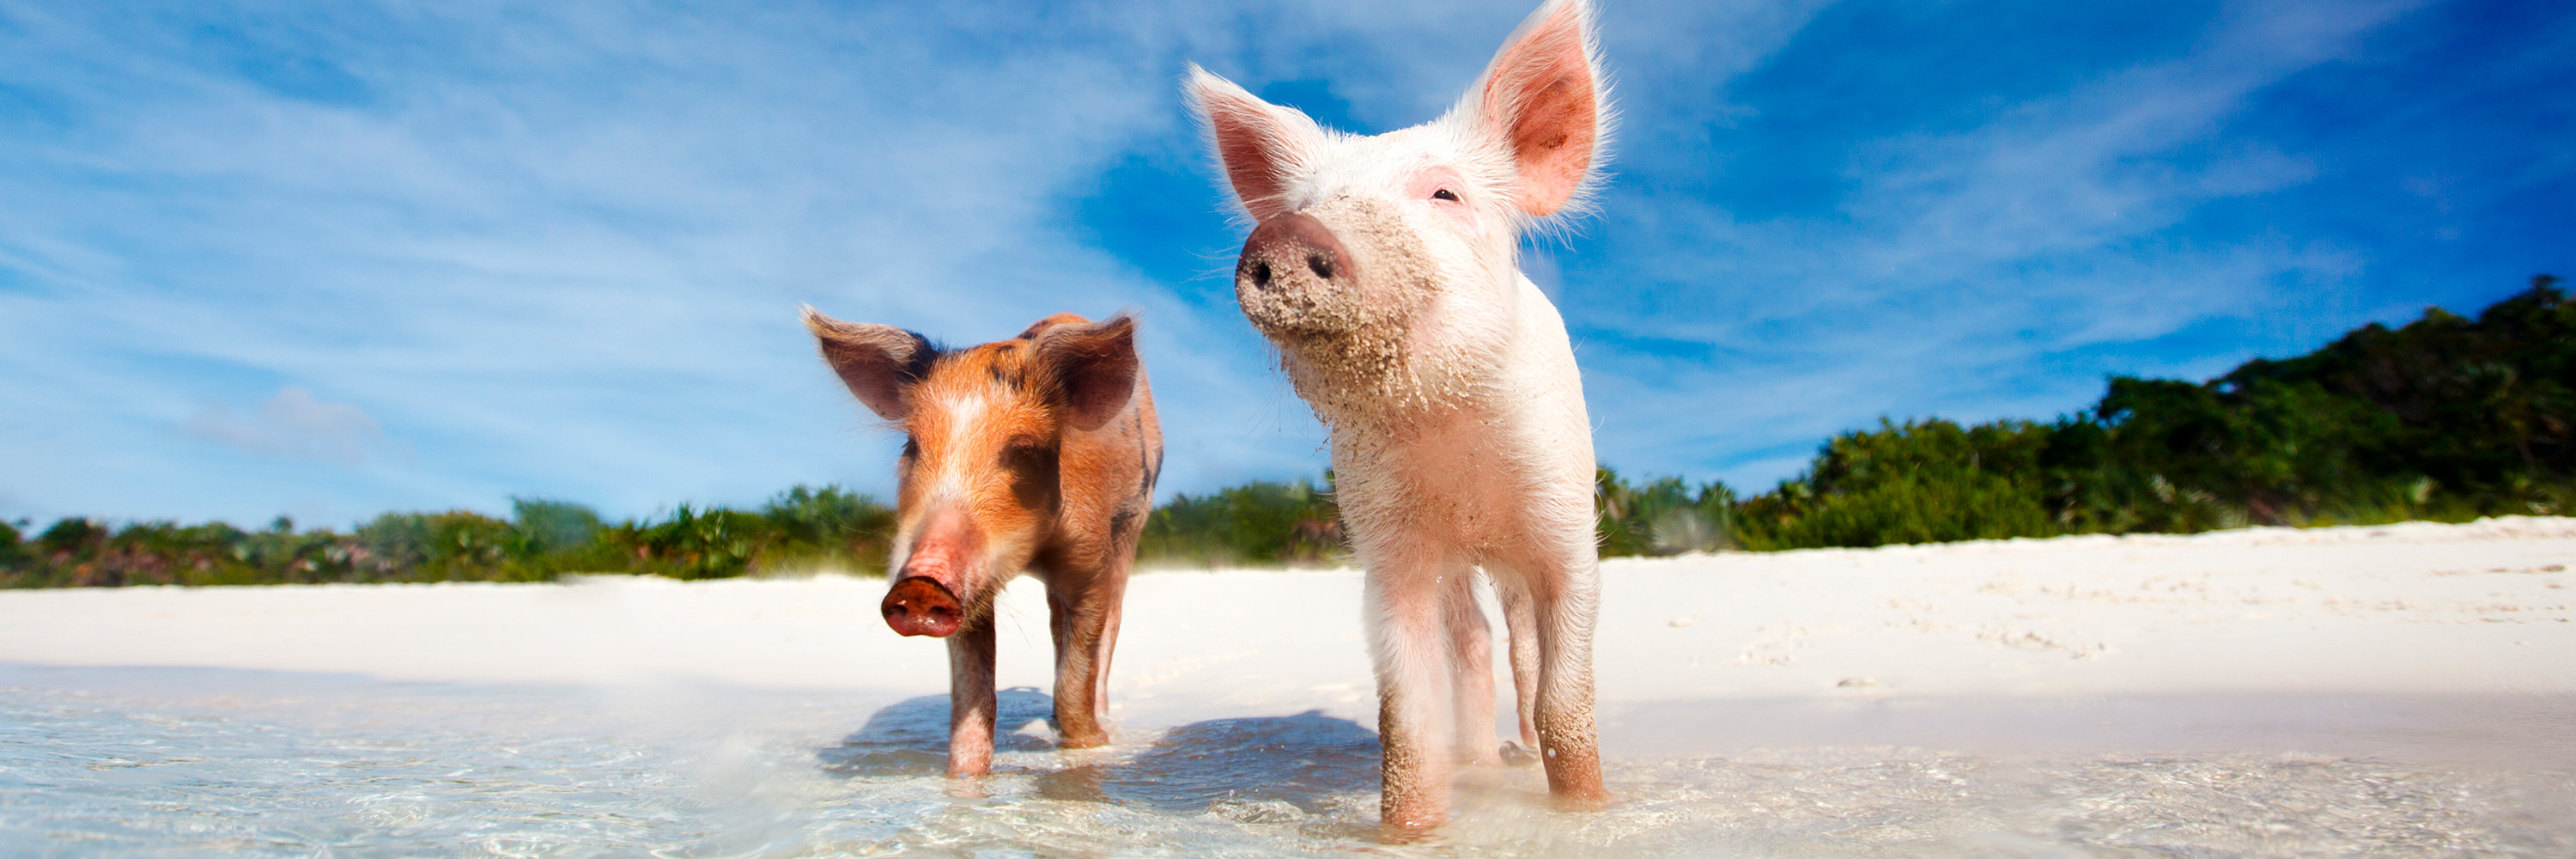 two pigs on sandy beach